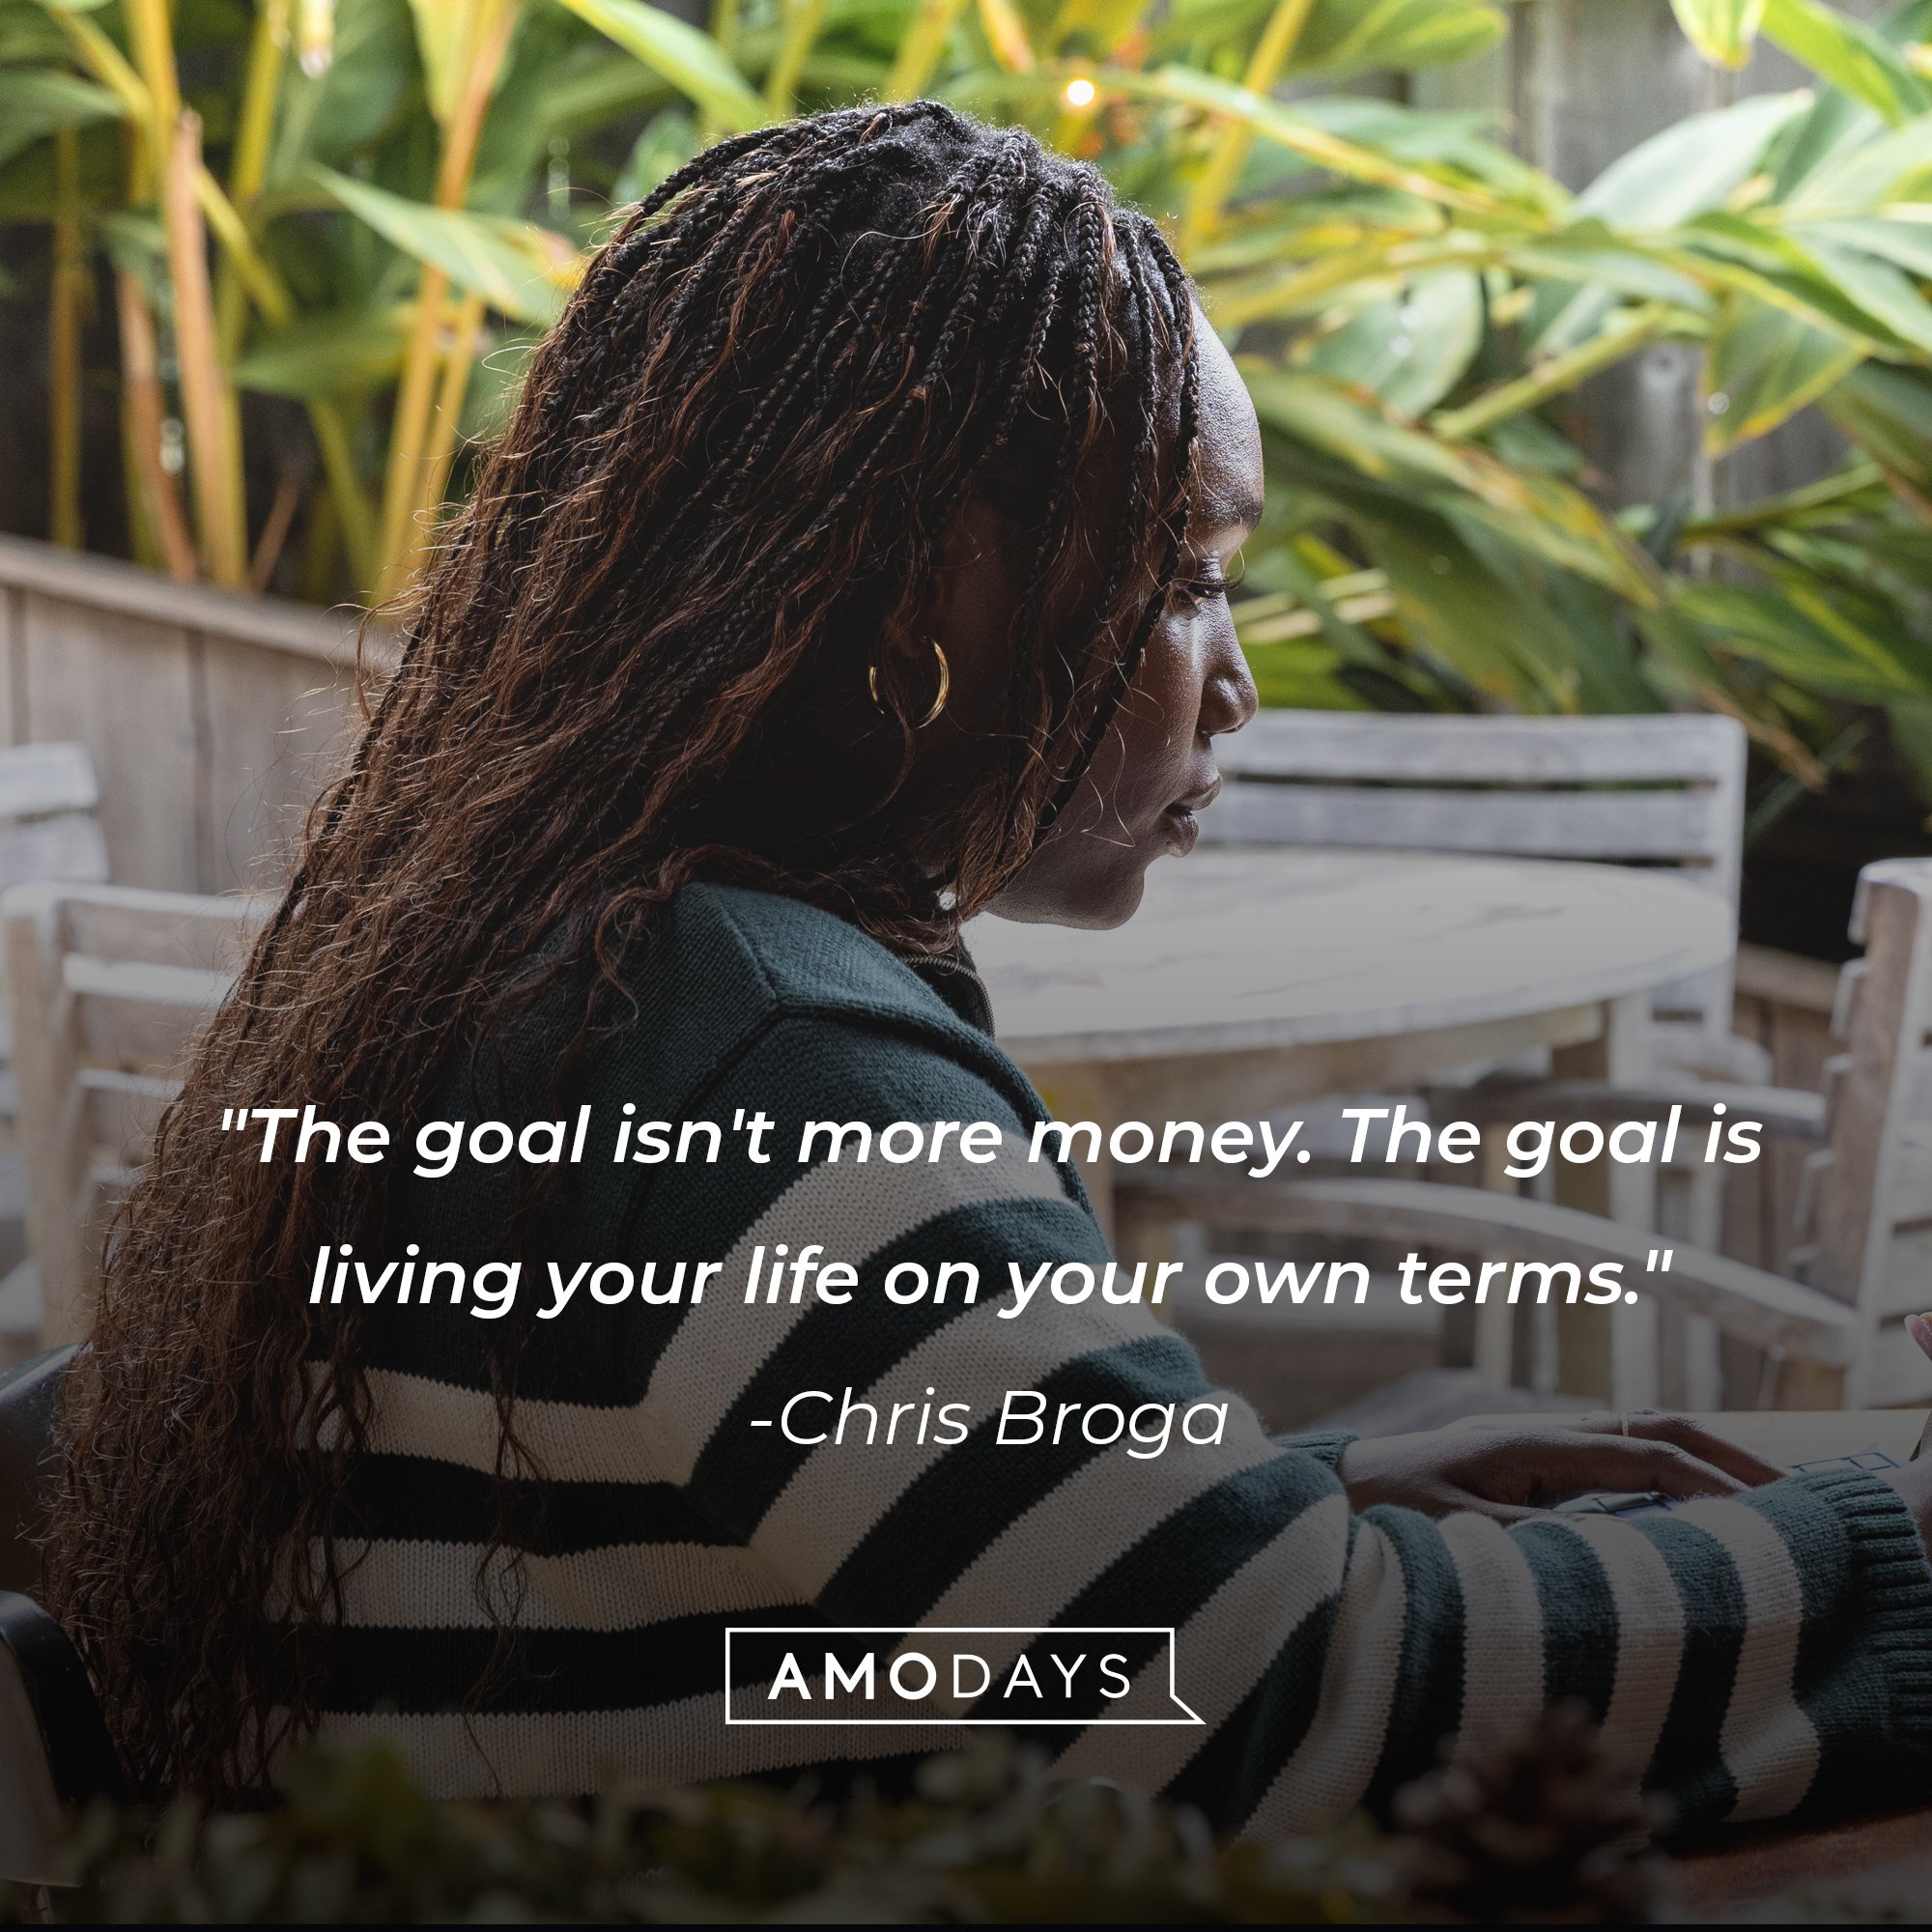 Chris Broga’s quote:  "The goal isn't more money. The goal is living your life on your own terms." | Image: AmoDays